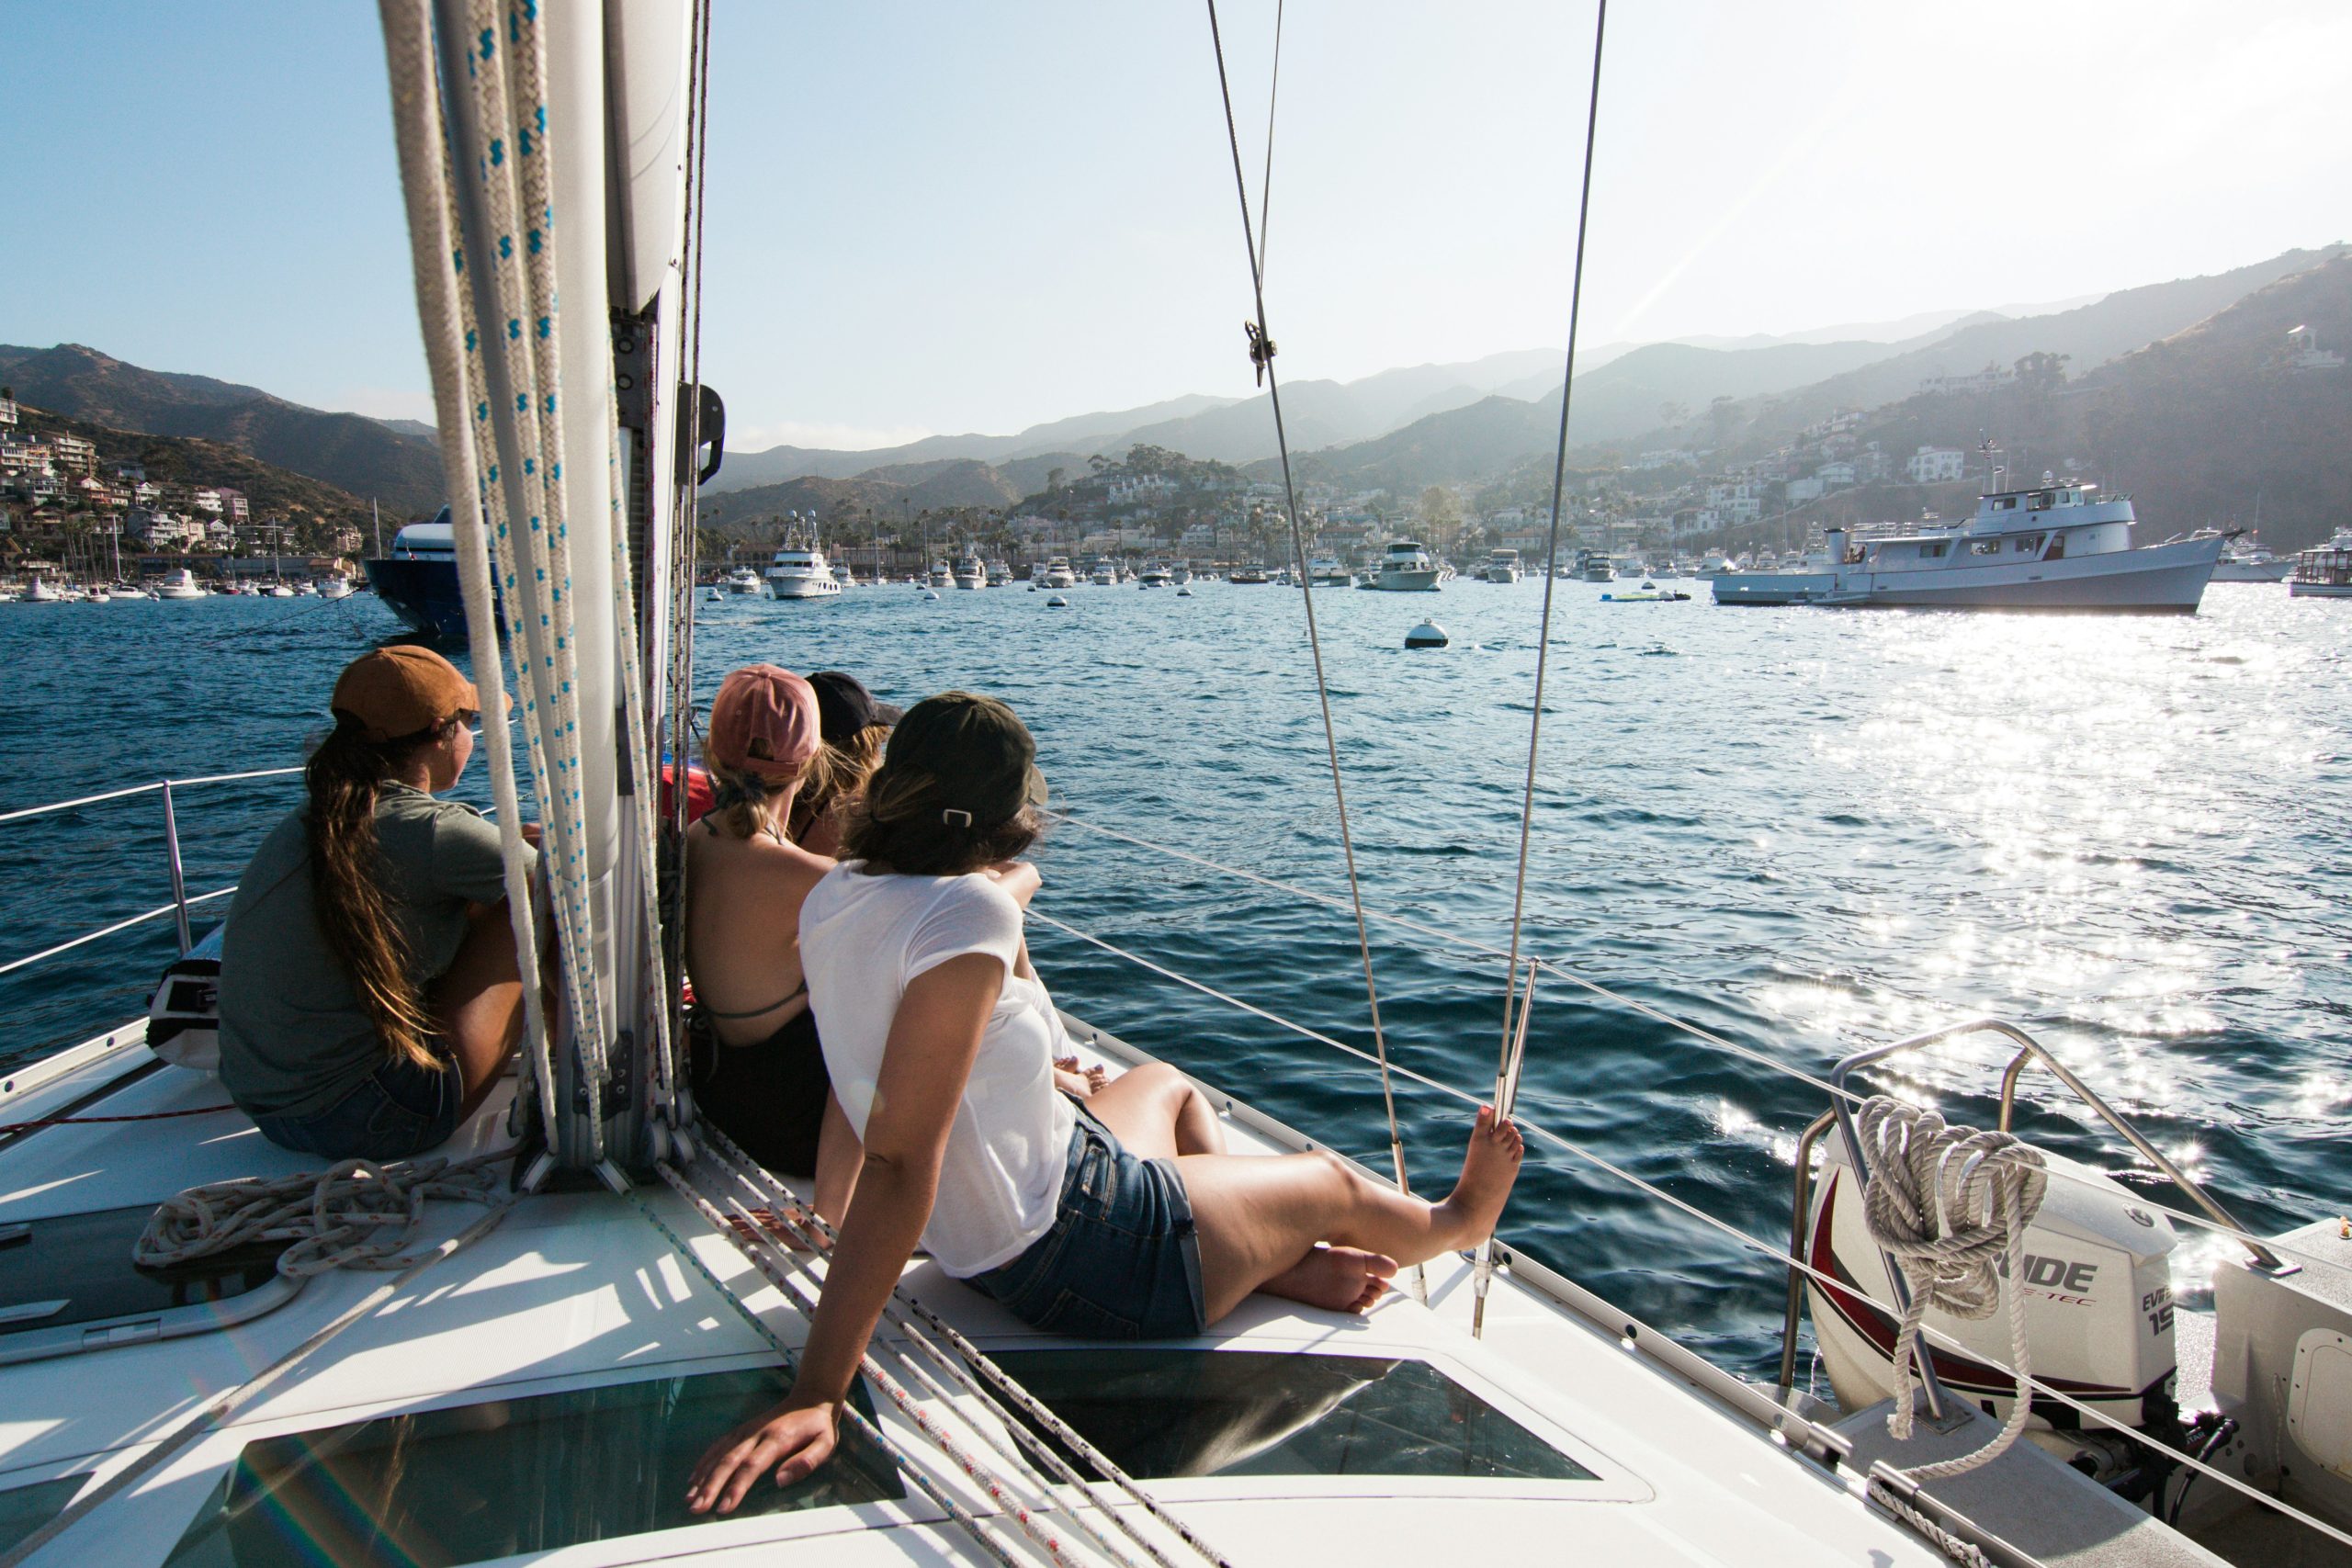 explore the world of sailing with our expert tips, guides, and advice. get the best gear, find the top destinations, and learn how to sail like a pro.